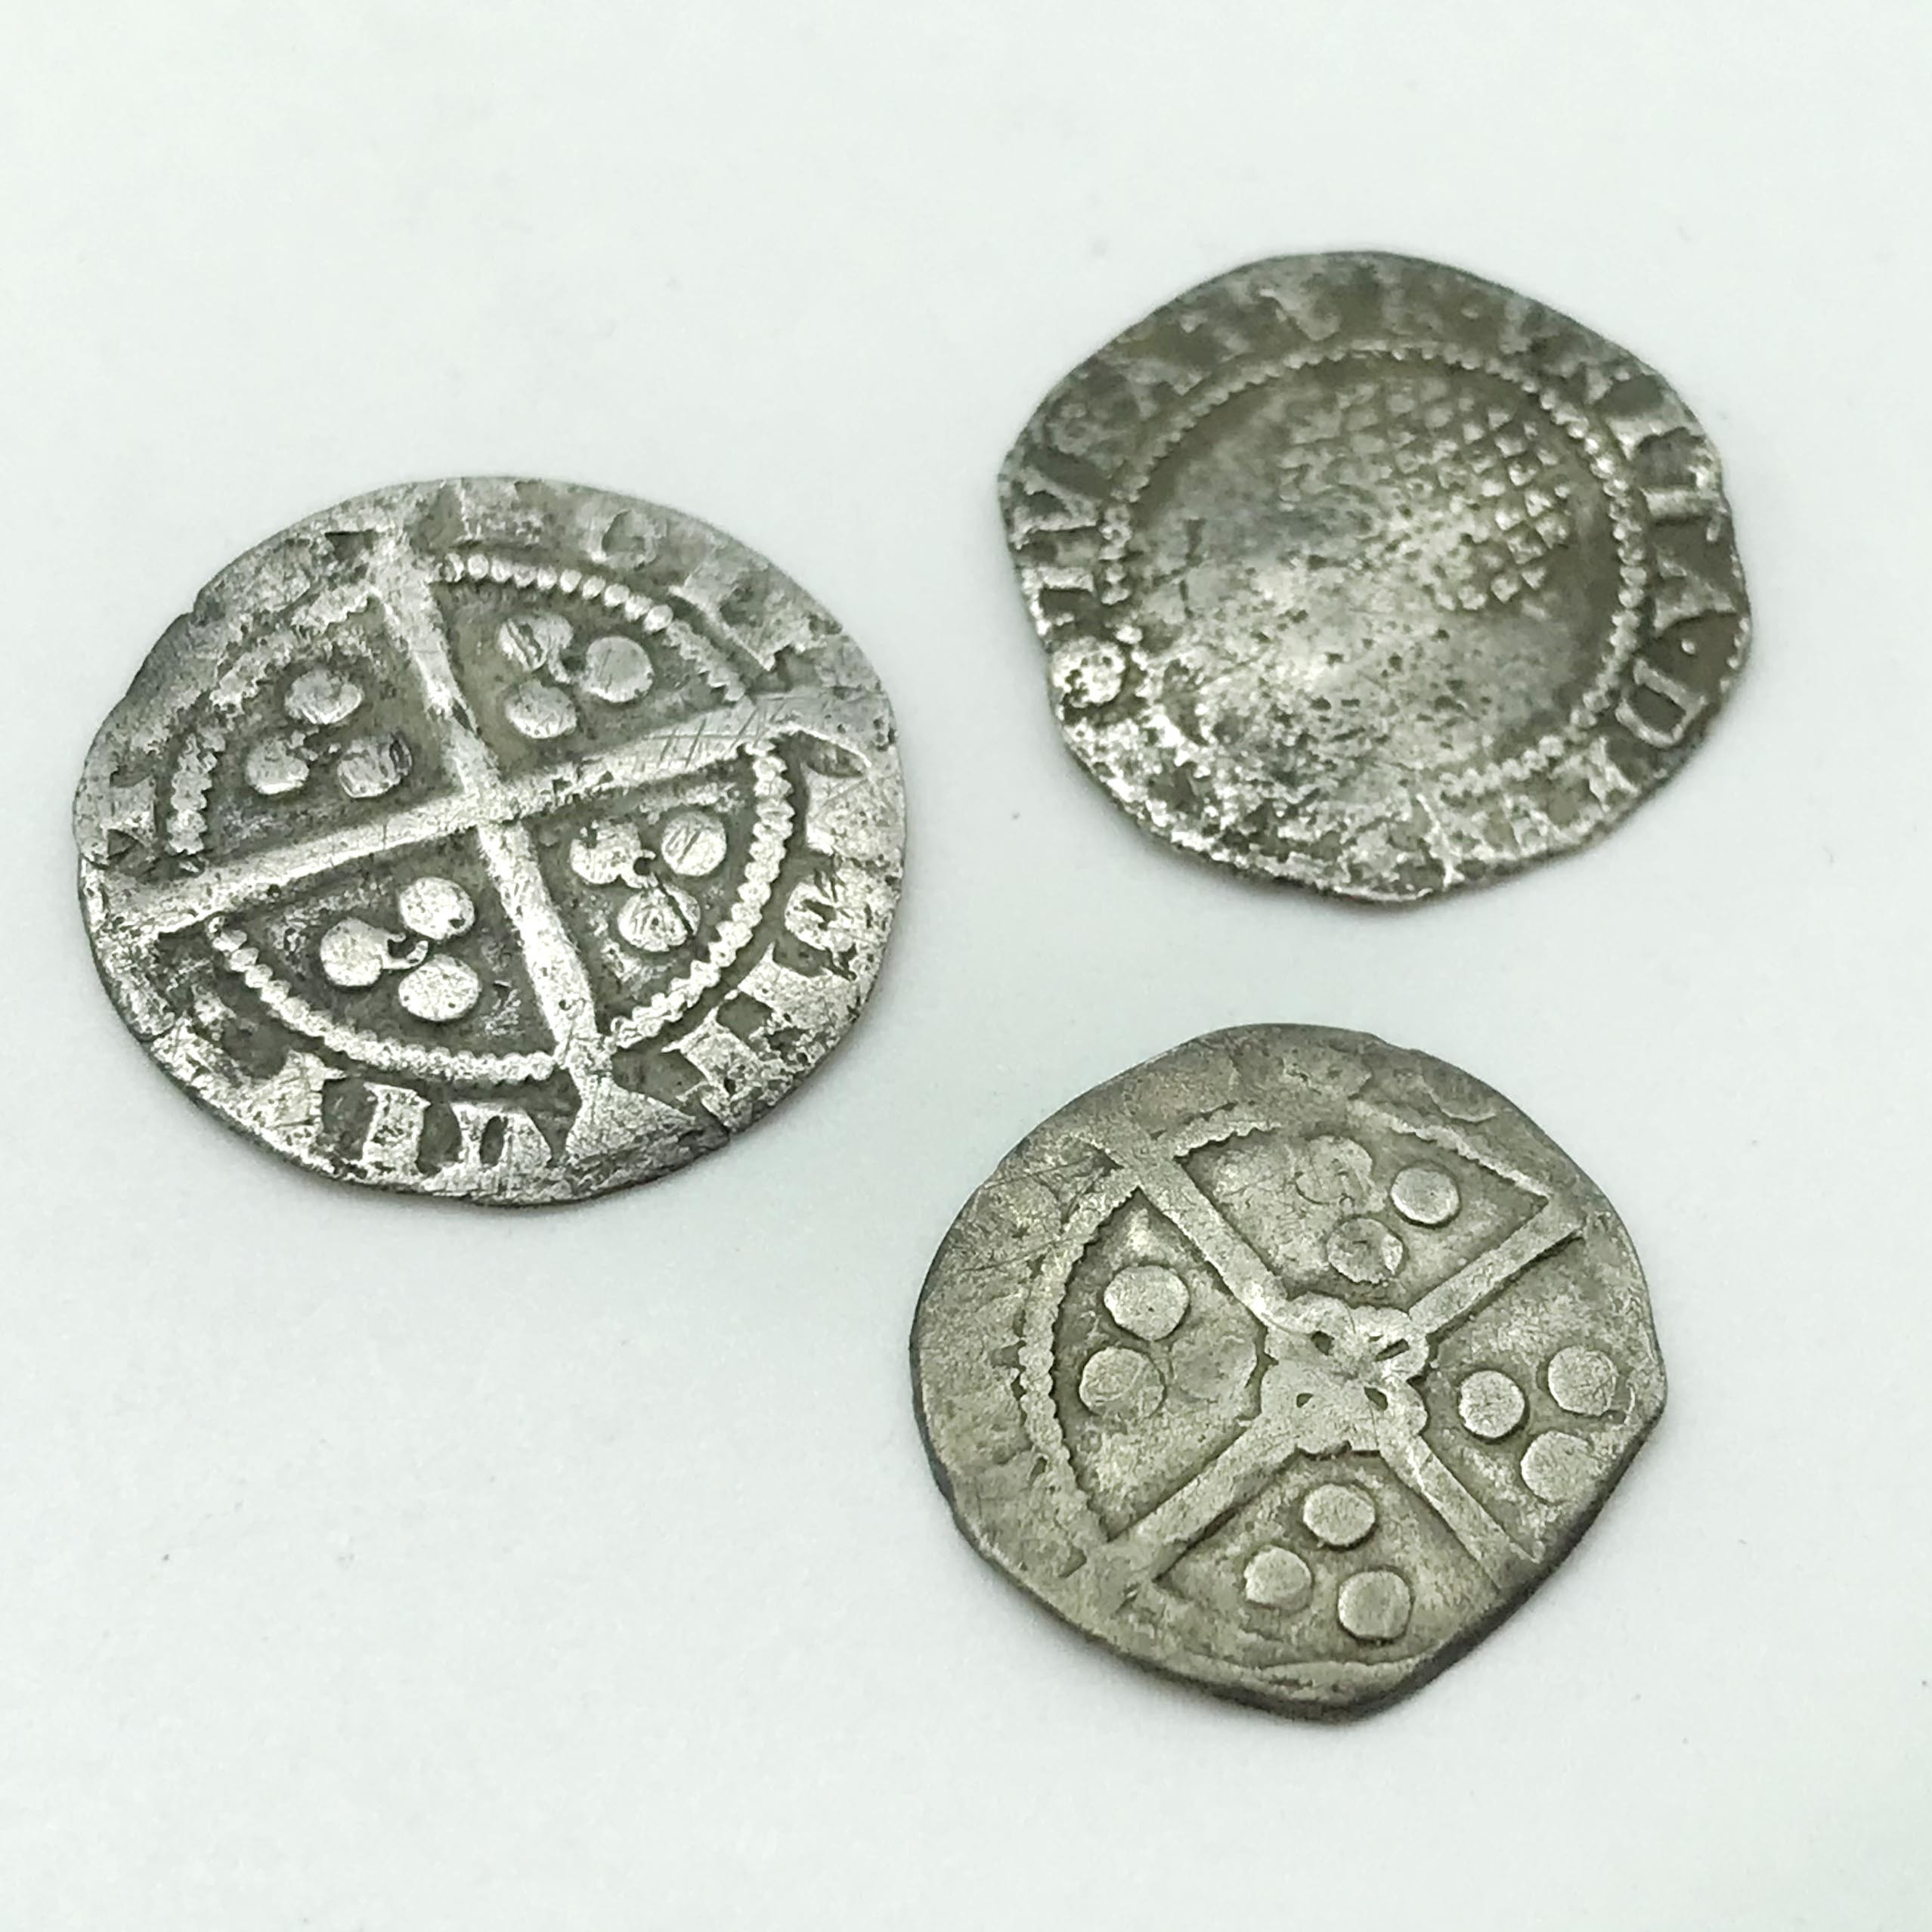 SMALL GROUP OF INTERESTING ITEMS INCLUDING HAMMERED COINS & MINIATURE SILVER STAMP INGOTS - Image 5 of 9